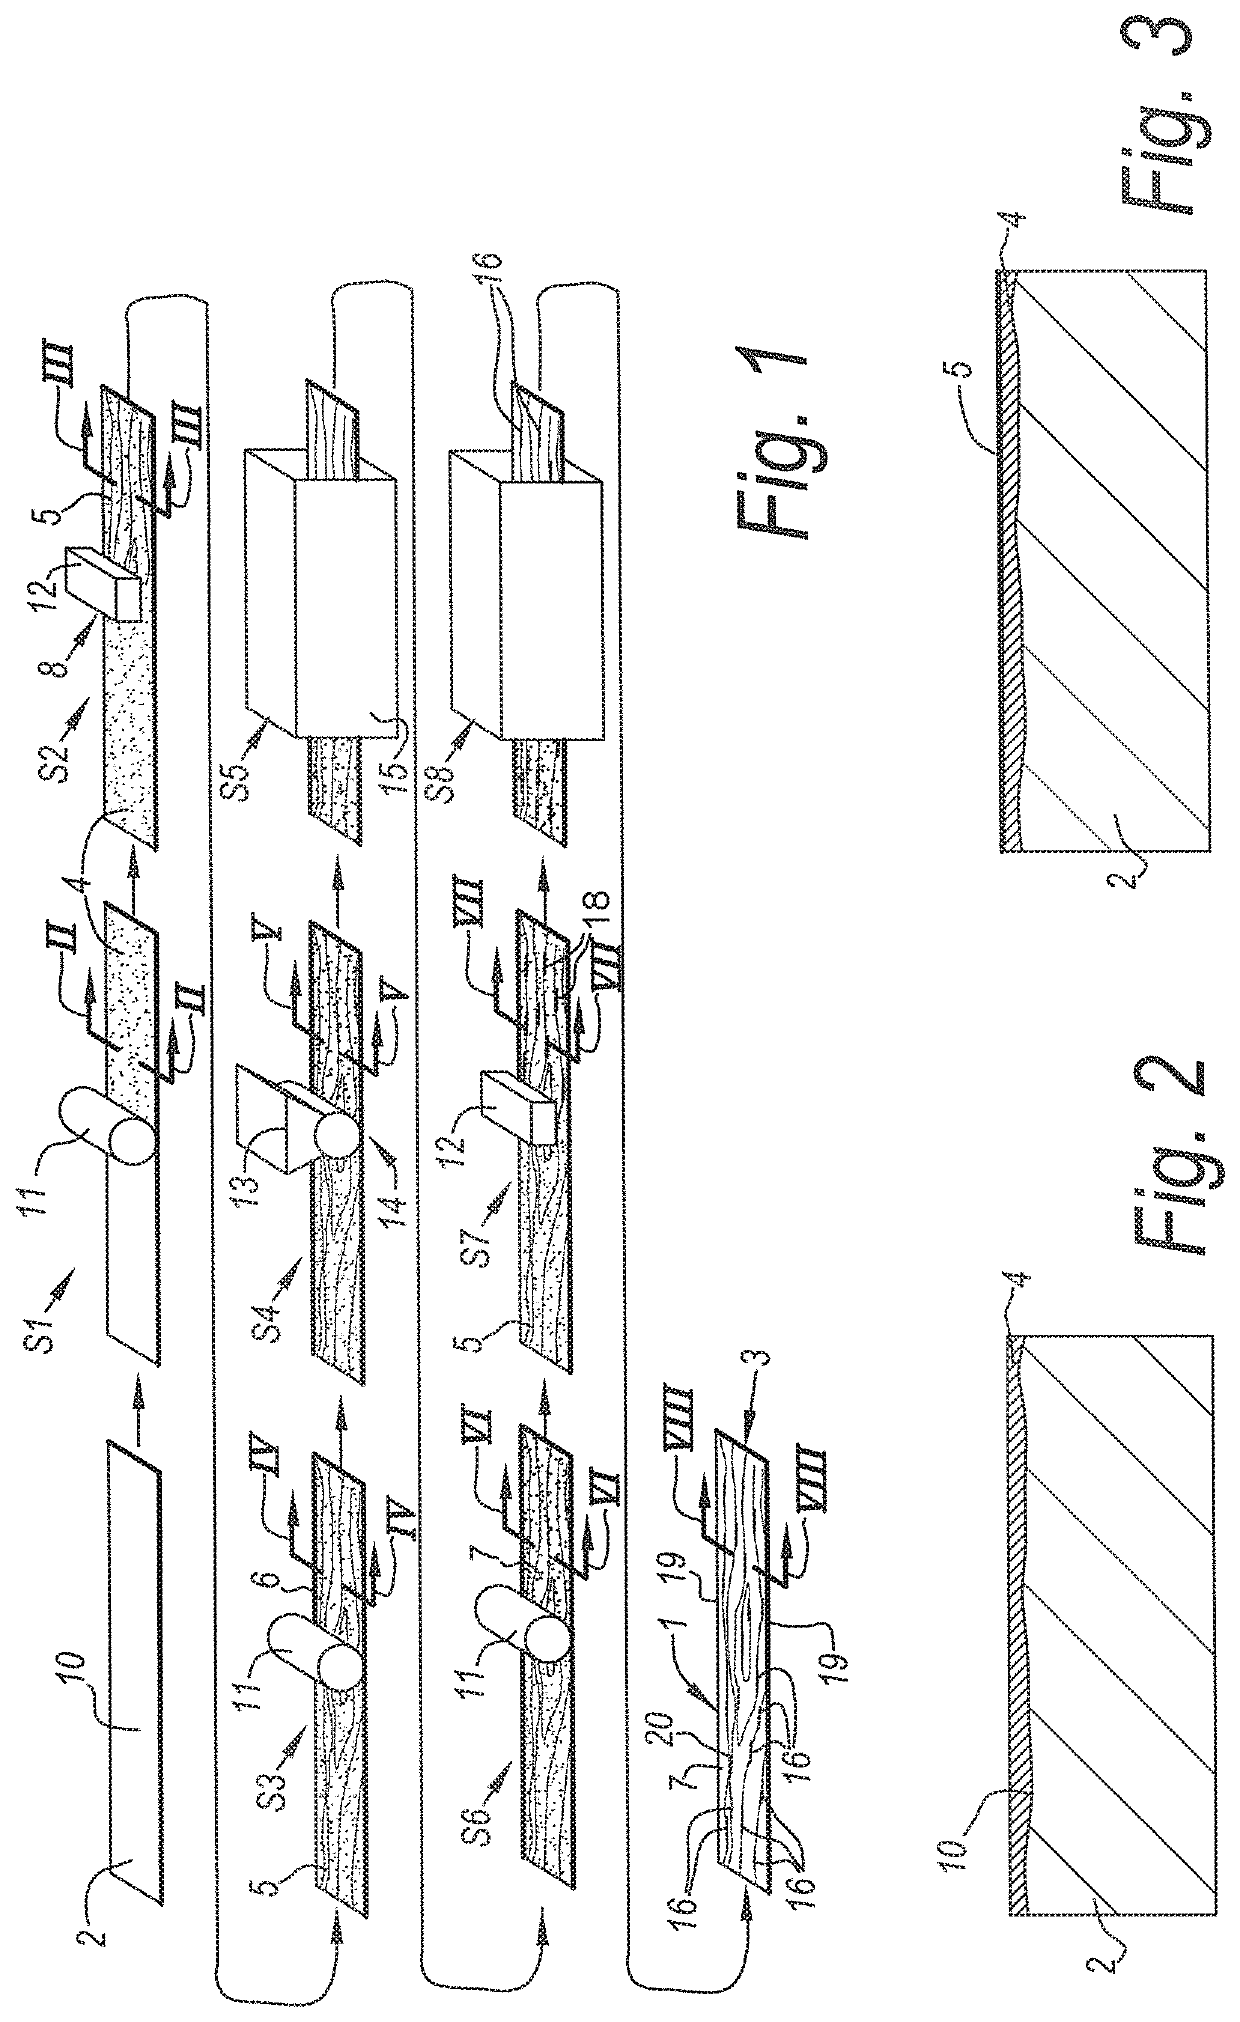 Methods for manufacturing panels